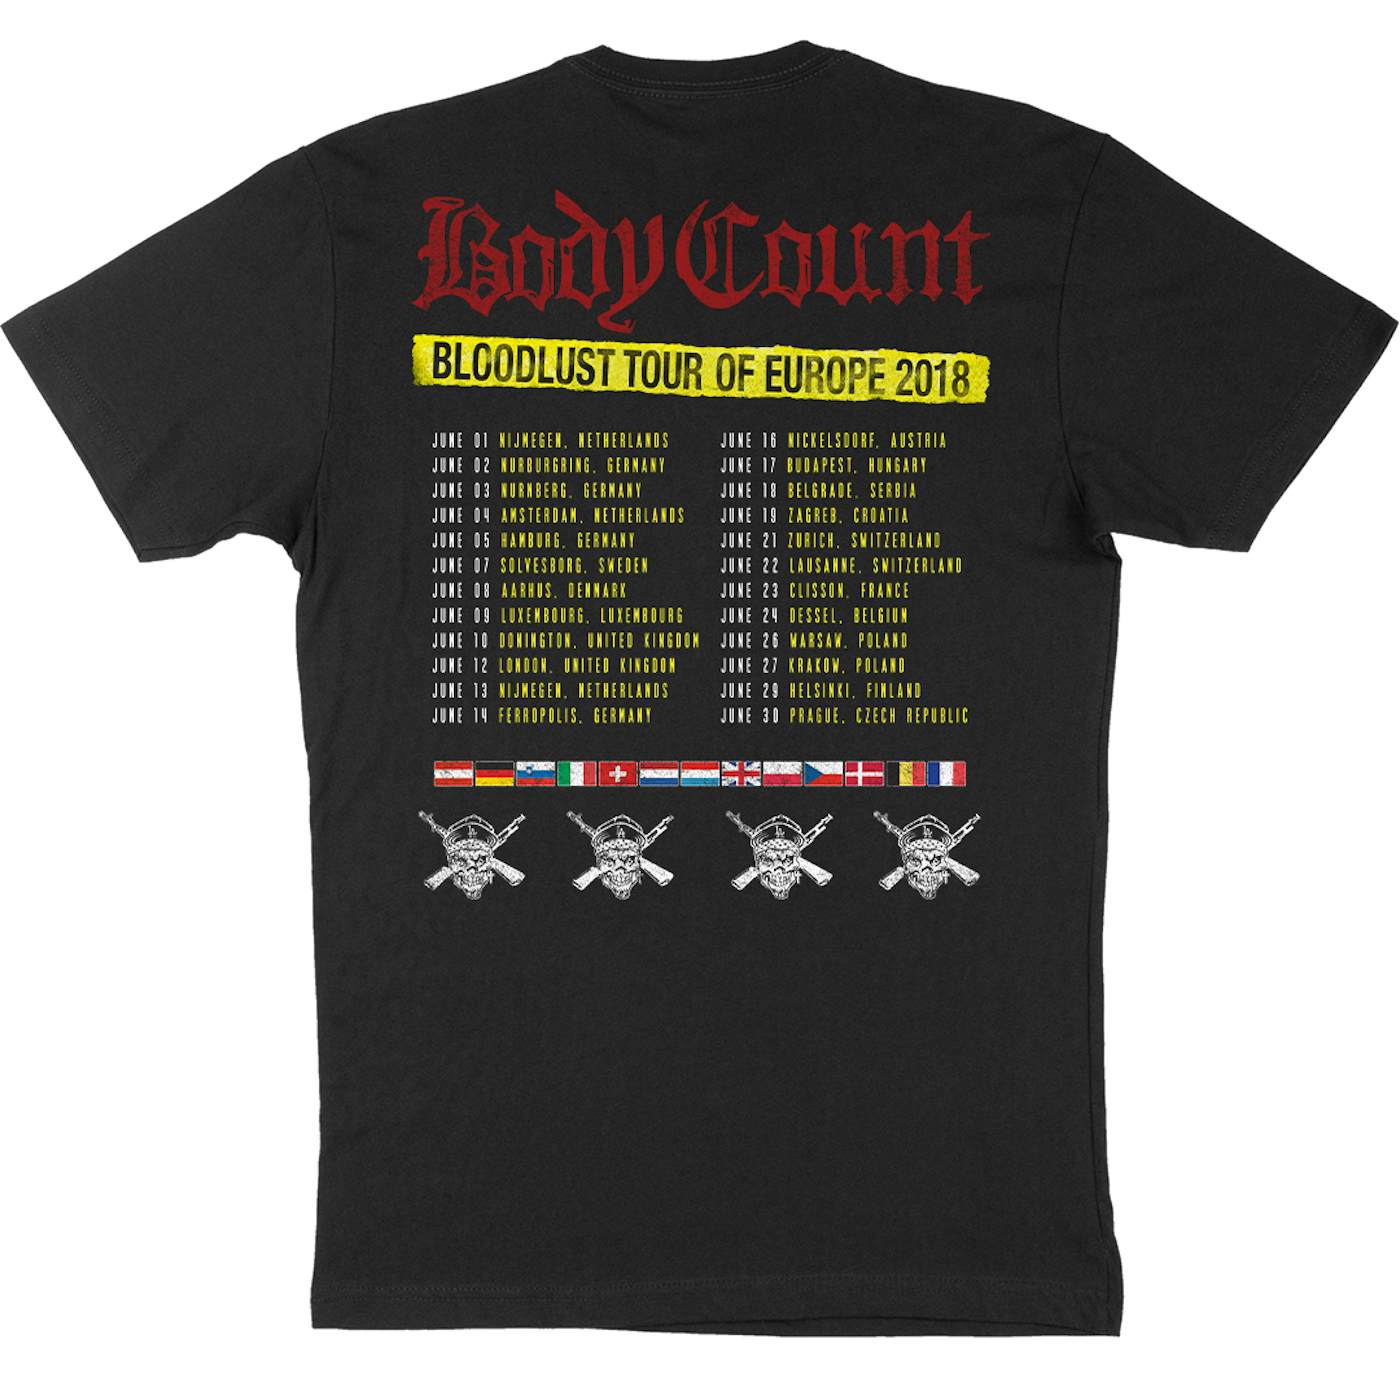 Body Count "Bloodlust" T-Shirt